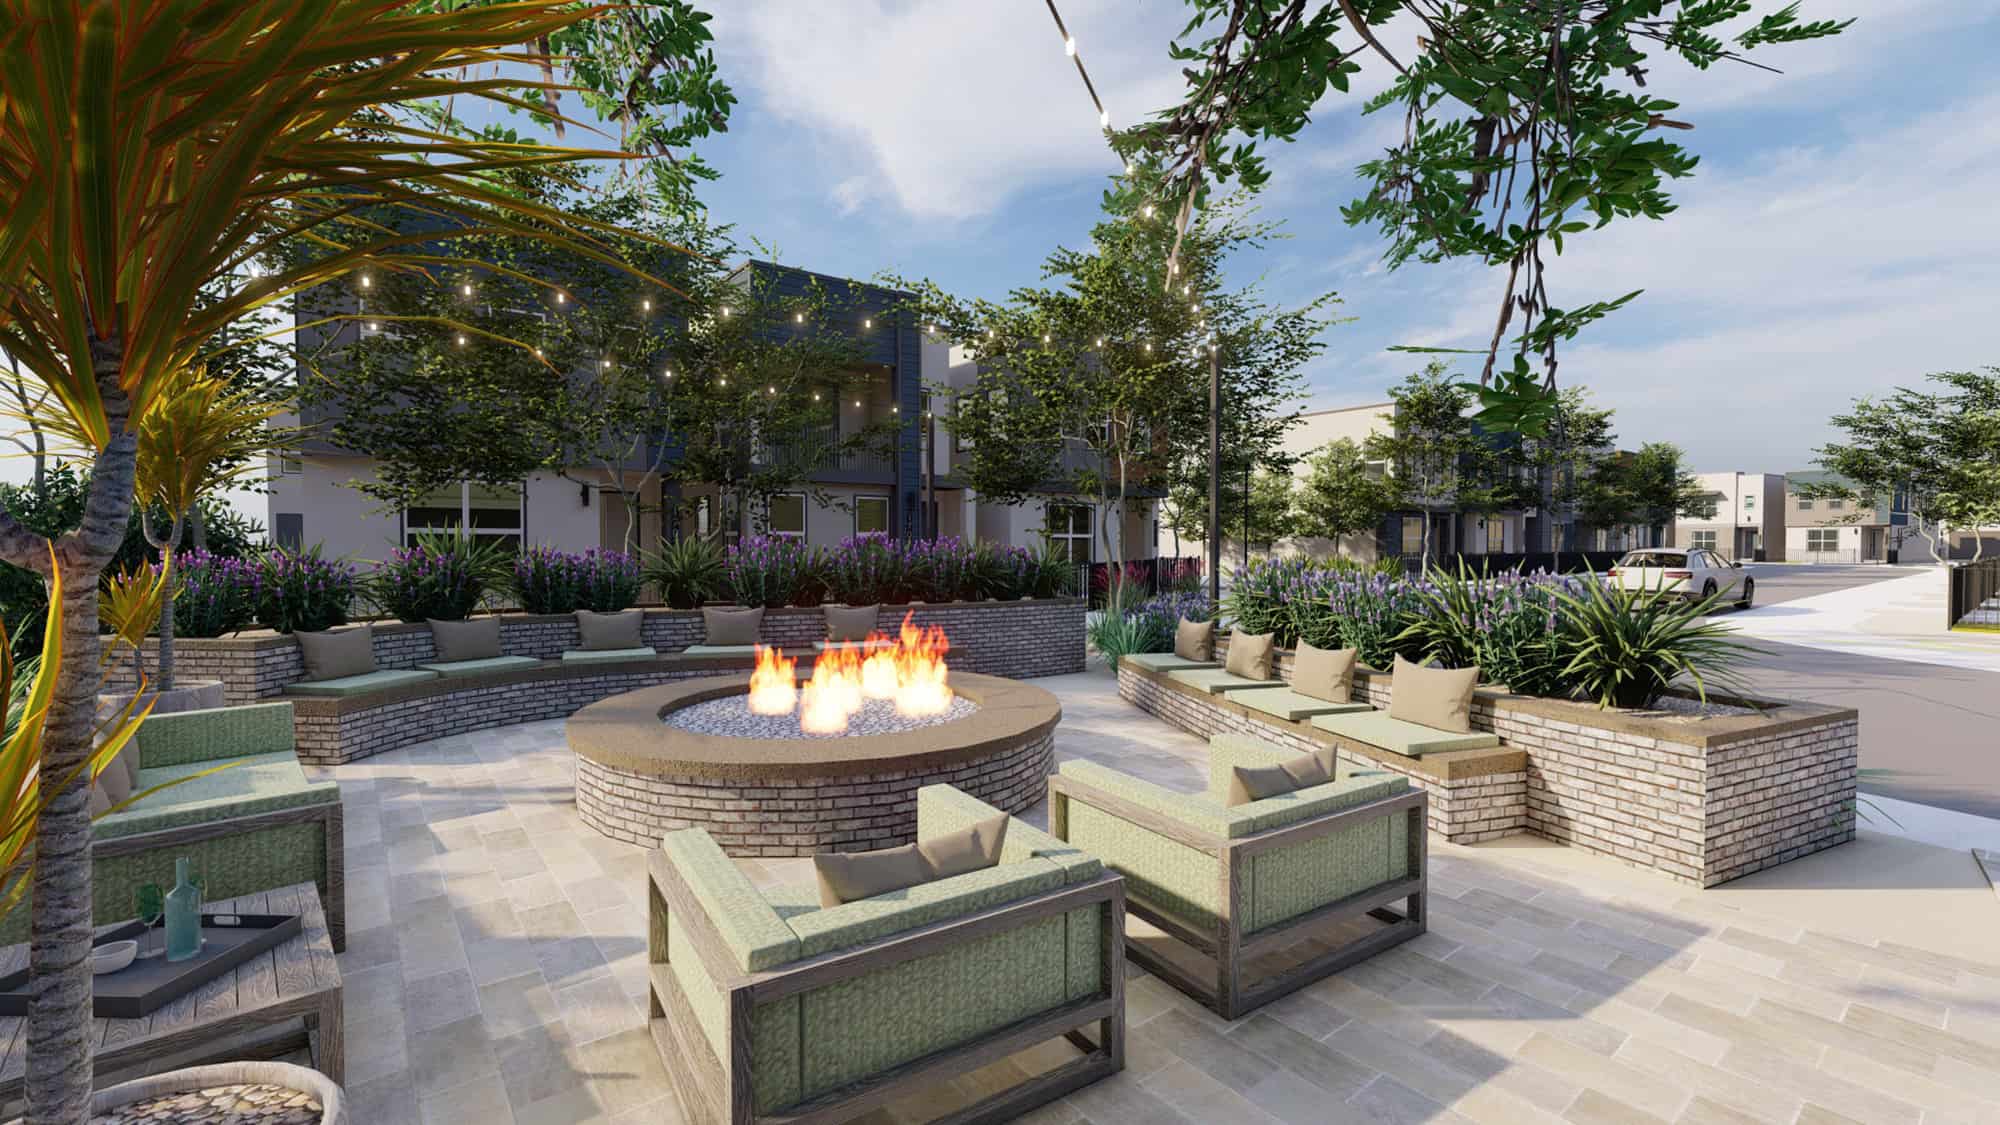 Firepit amenity seating area at Cyrene